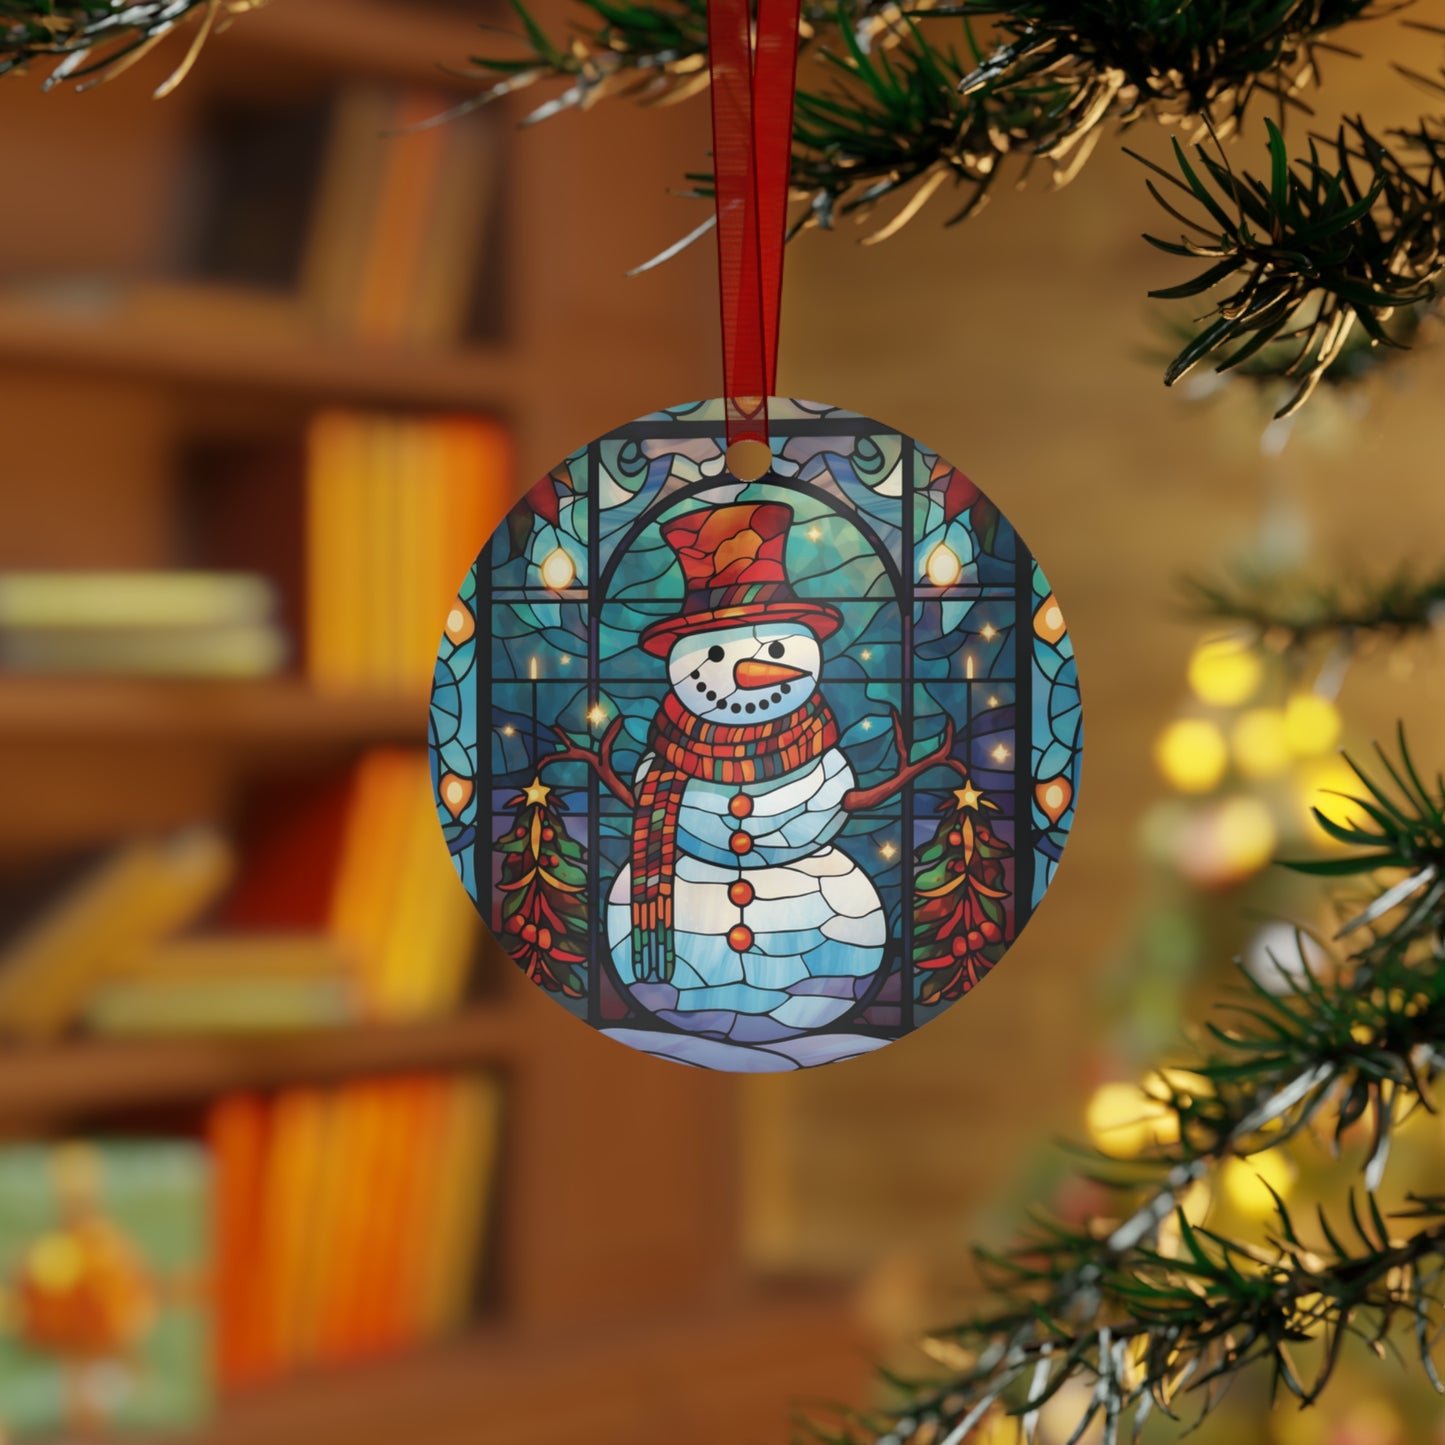 Stunning Stained Glass Style Snowman Ornament Lightweight Shaterproof Metal Ornaments Christmas Ornament Exchange Decoration Christmas Gift